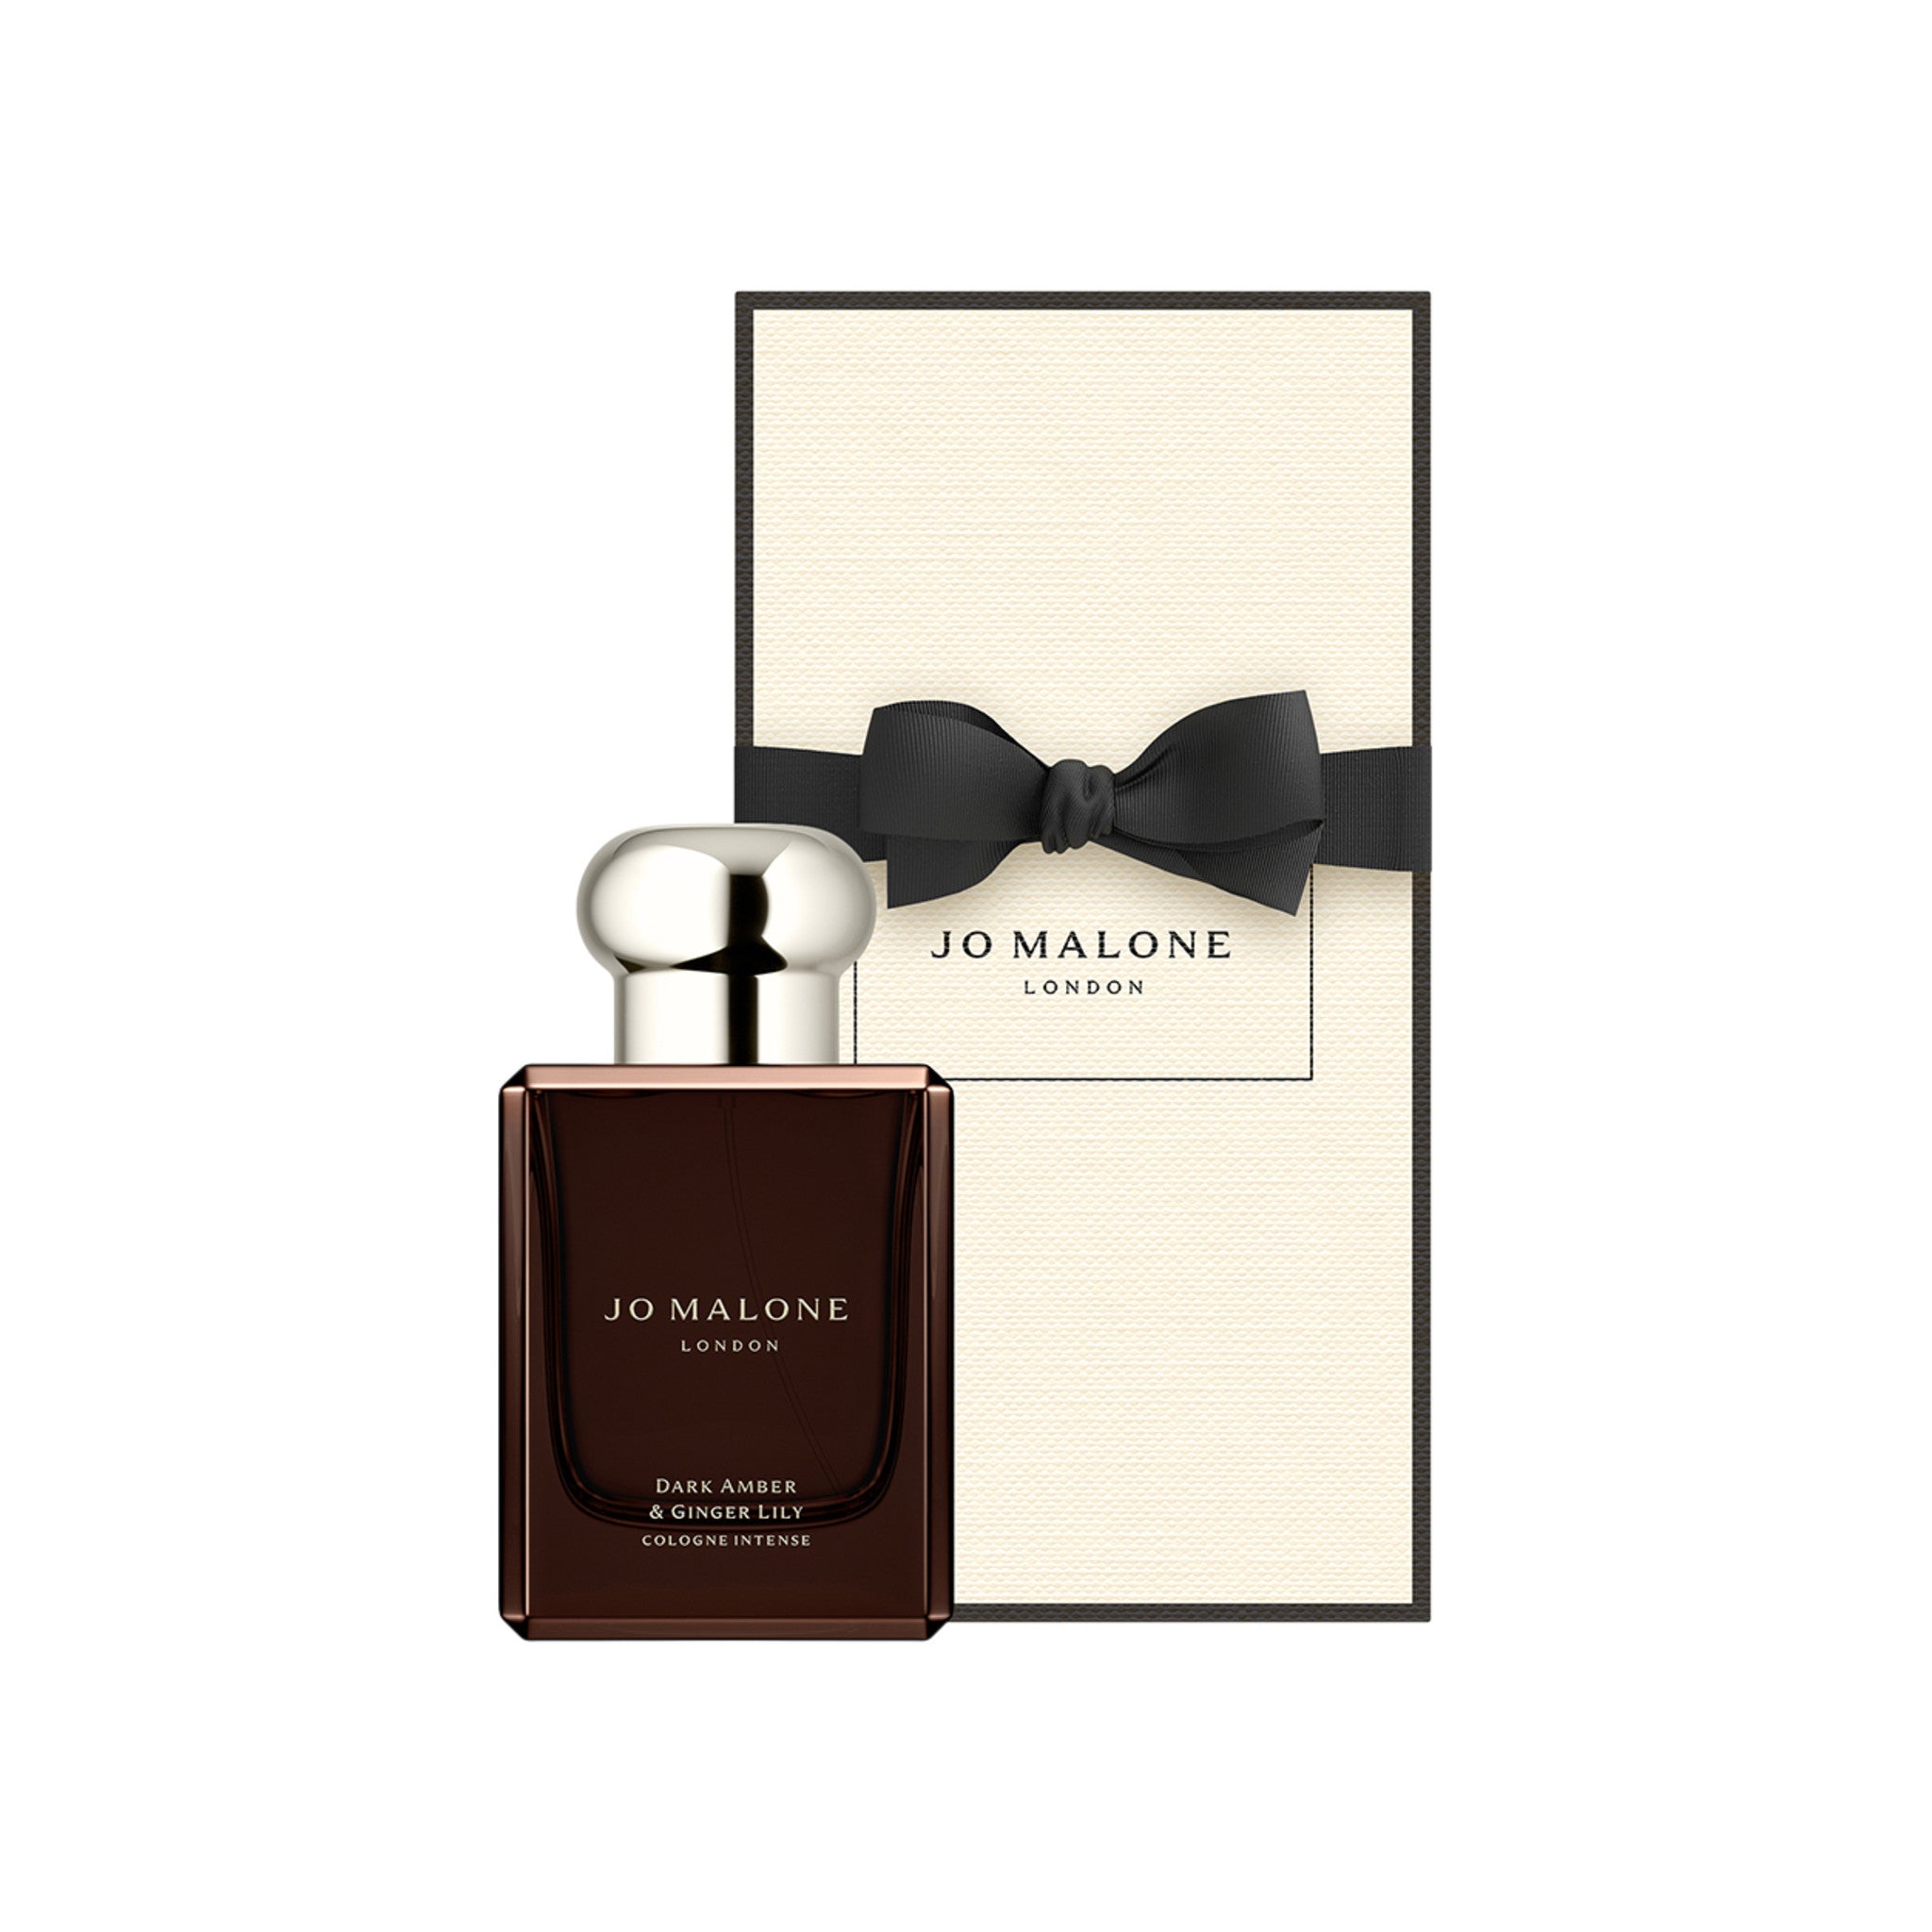 Jo Malone London Dark Amber and Ginger Lily Cologne Intense Size variant: 50 ml main image.